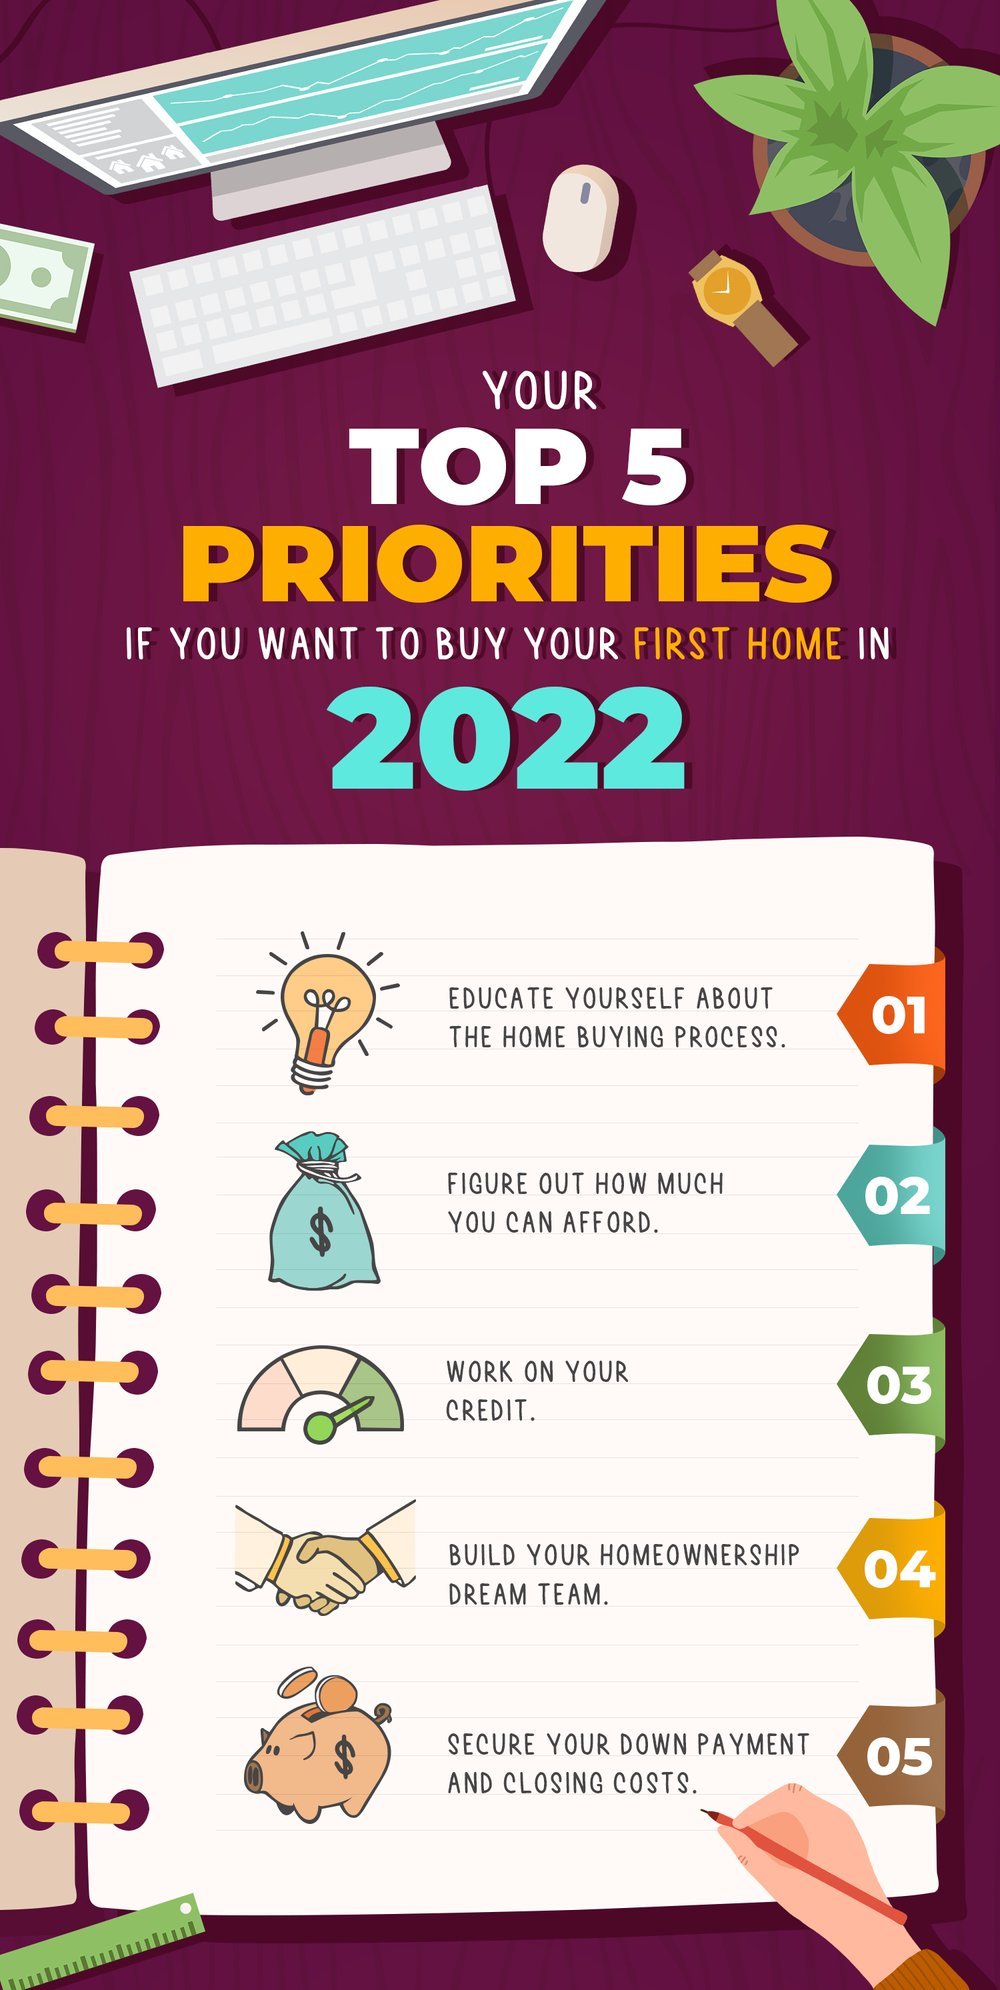 Your Top 5 Priorities If You Want To Buy Your First Home in 2022